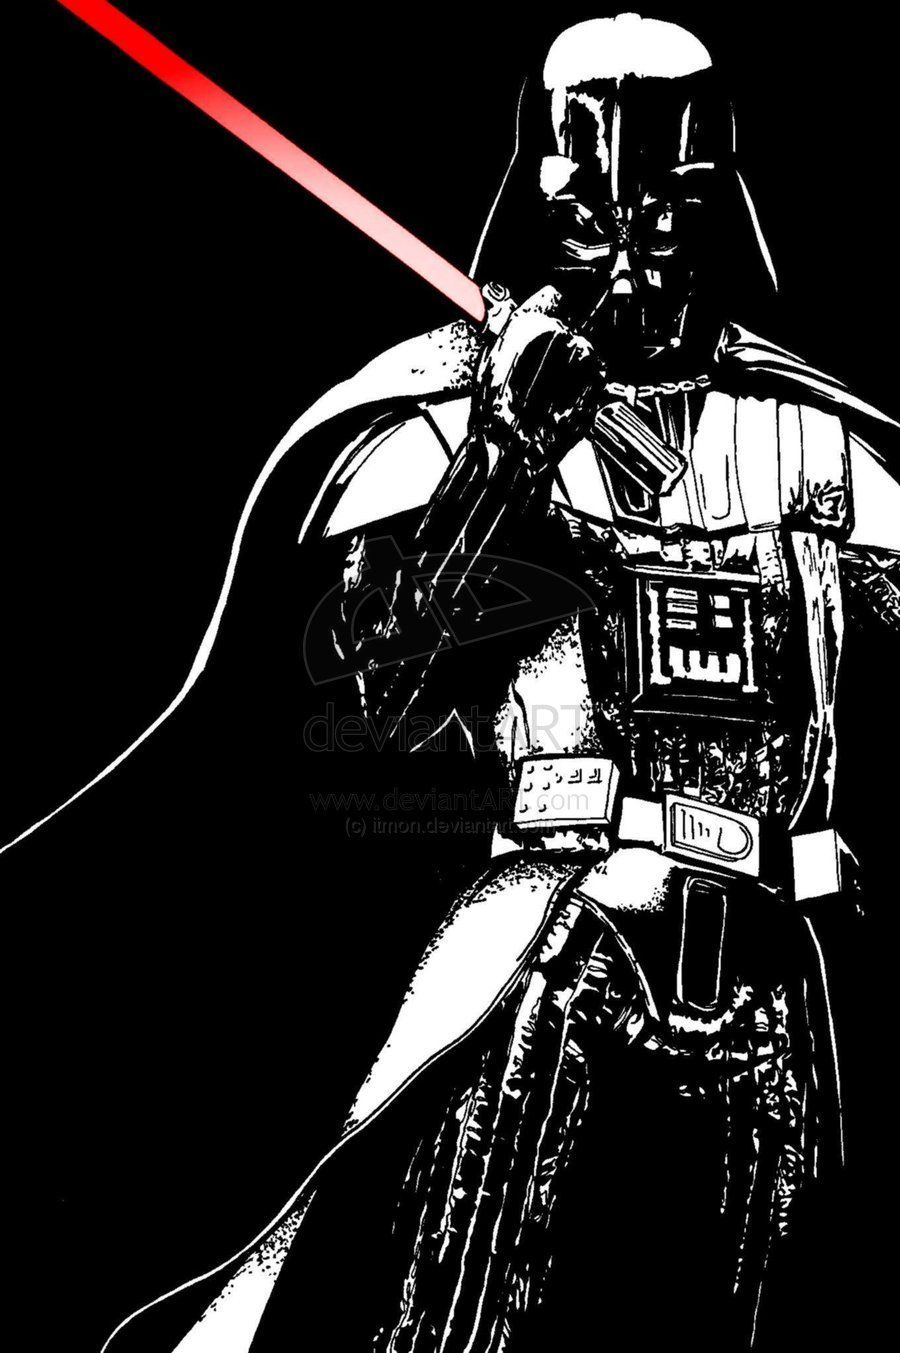 Go Force Choke Yourself. Star wars picture, Vader star wars